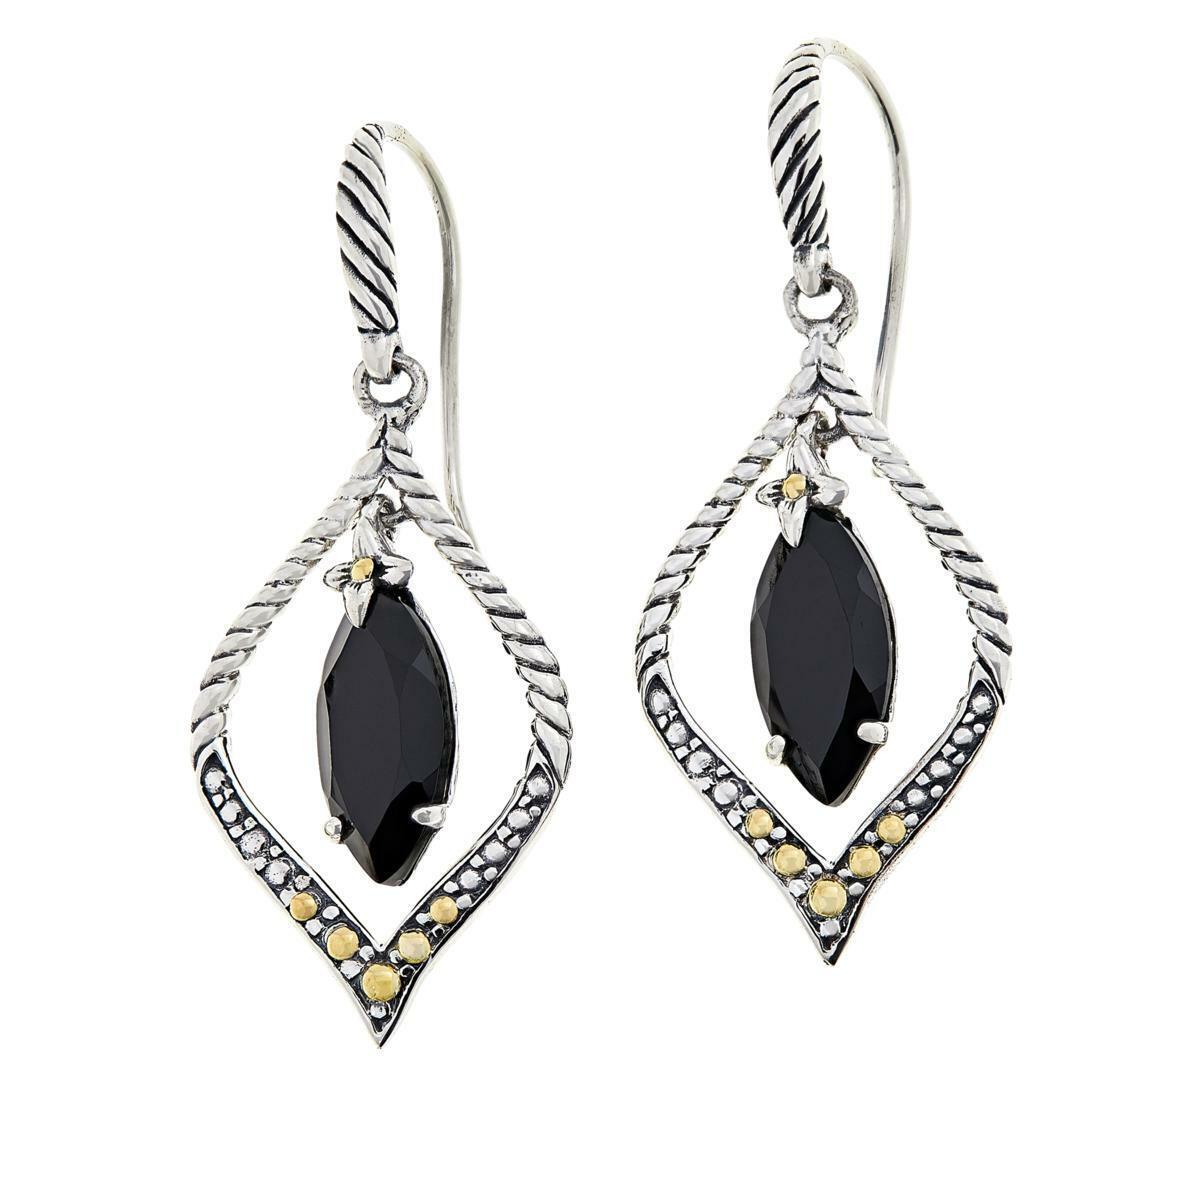 Bali Designs Marquise Spinel Cable Hook Drop Earrings HSN $170.00